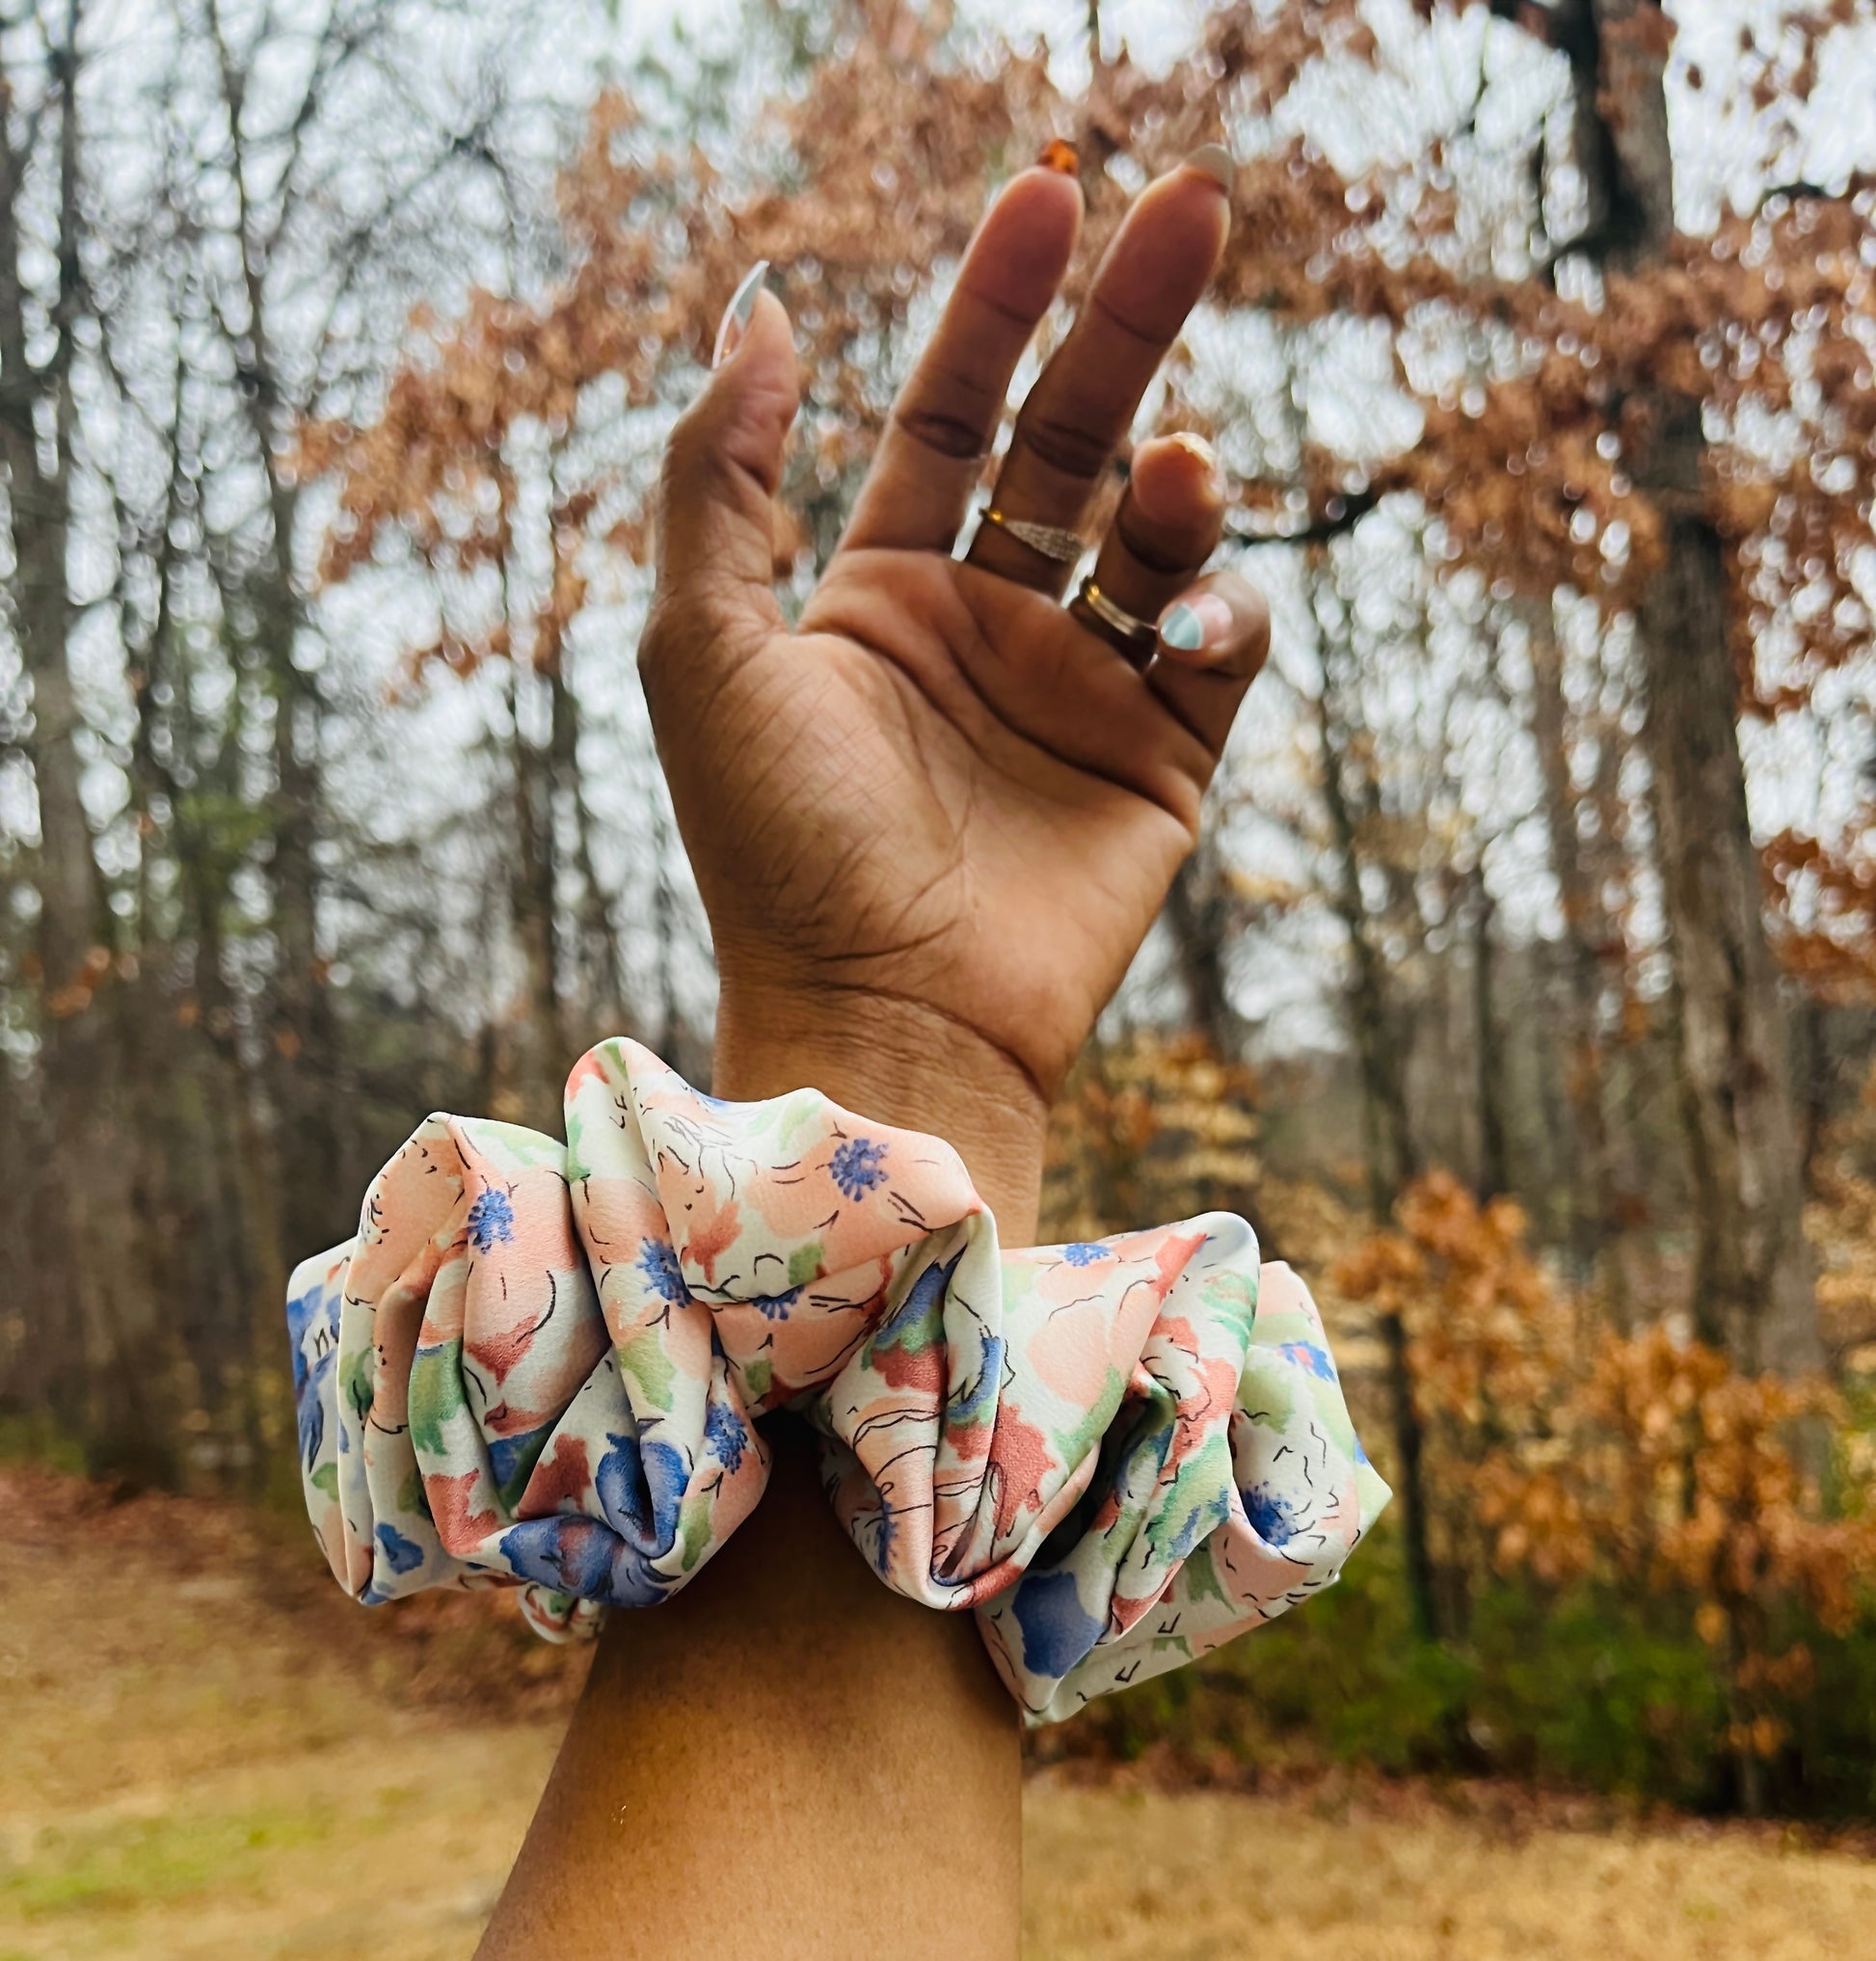 You are seeing our satin scrunchies in 3 sizes..  The sizes of our Satin Scrunchies are Large, Medium and Mini.  Simply select the size you want in the drop down menu and add them to the card.   Our Satin Scrunchies are perfect for all hair types and every person. We have multiple colors and sizes available